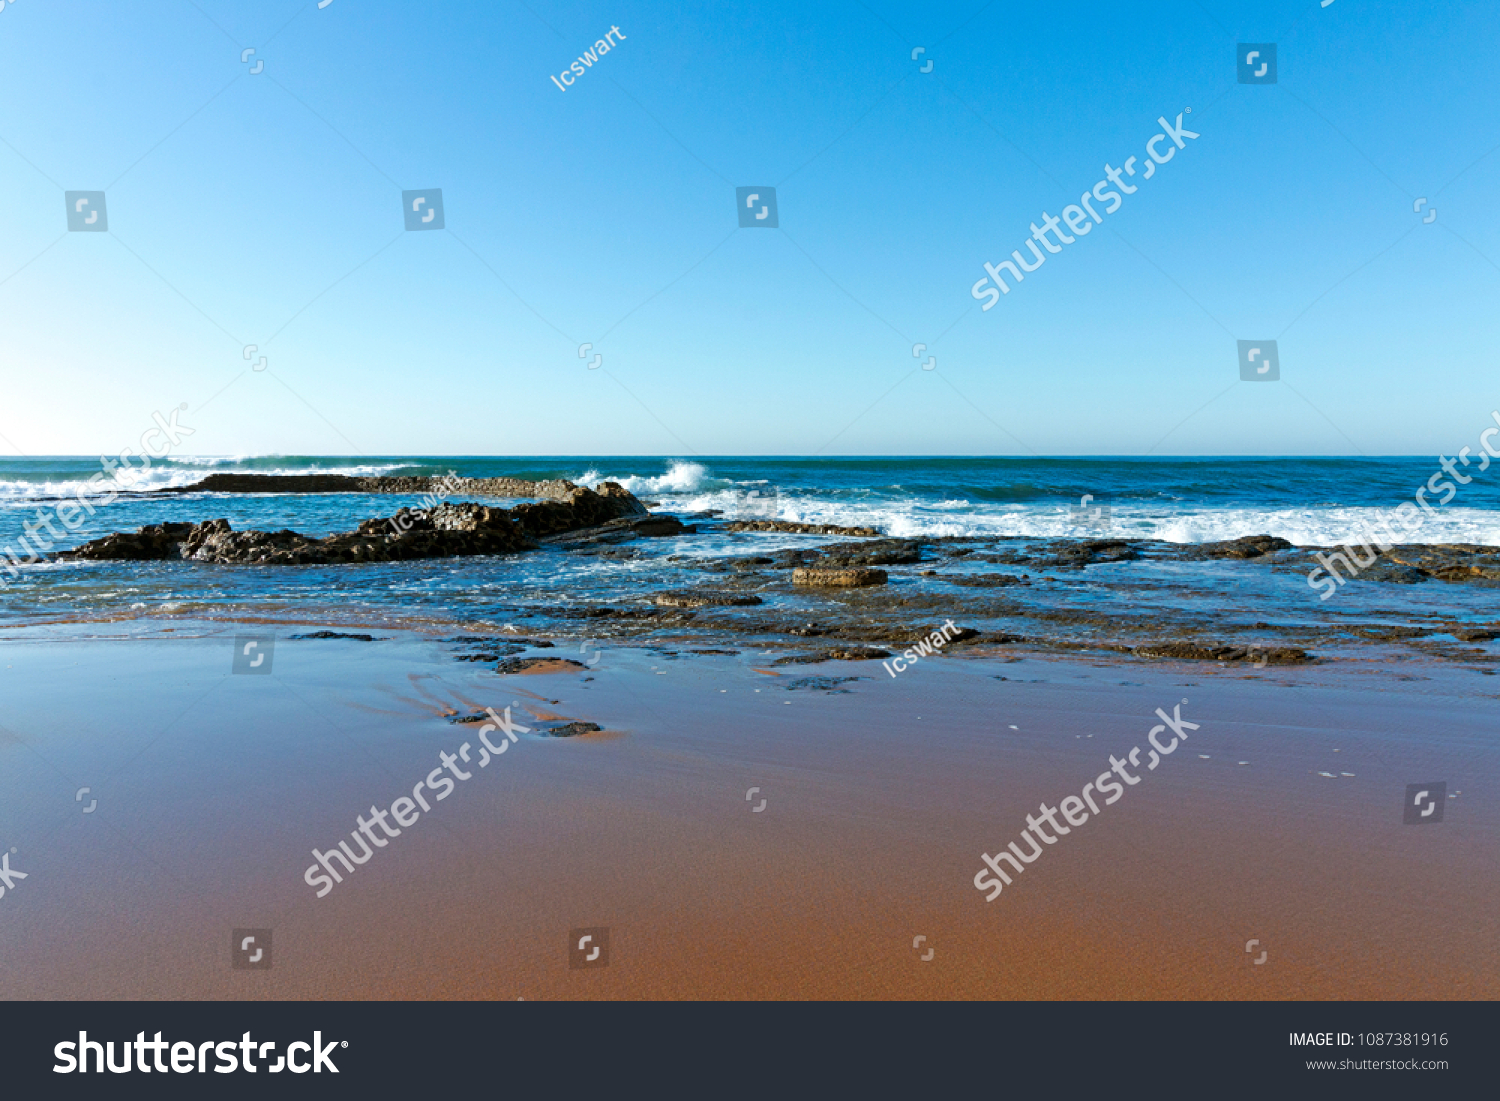 Wet smooth shoreline beach sand with rocks ocean and waves against blue coastal skyline in Kwa-Zulu Natal, South Africa #1087381916